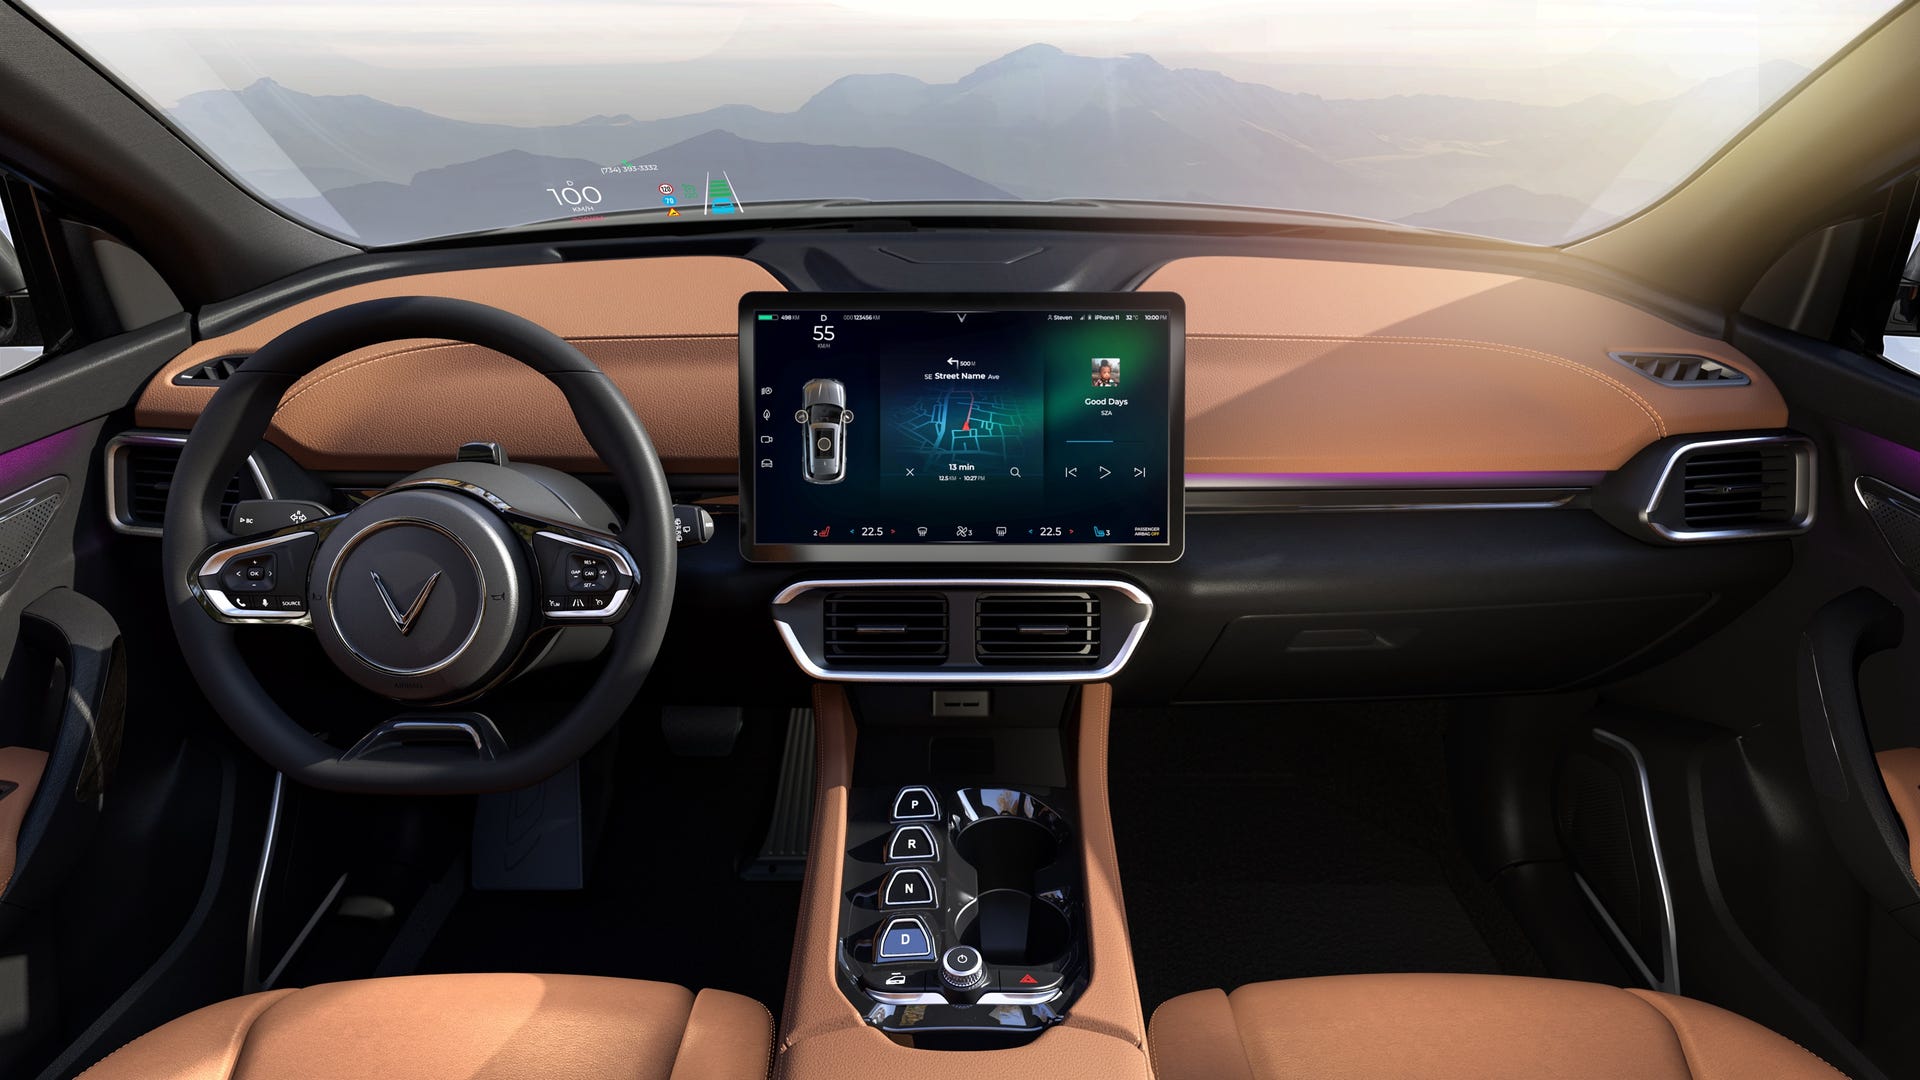 2022 VinFast VF 8 dashboard and infotainment